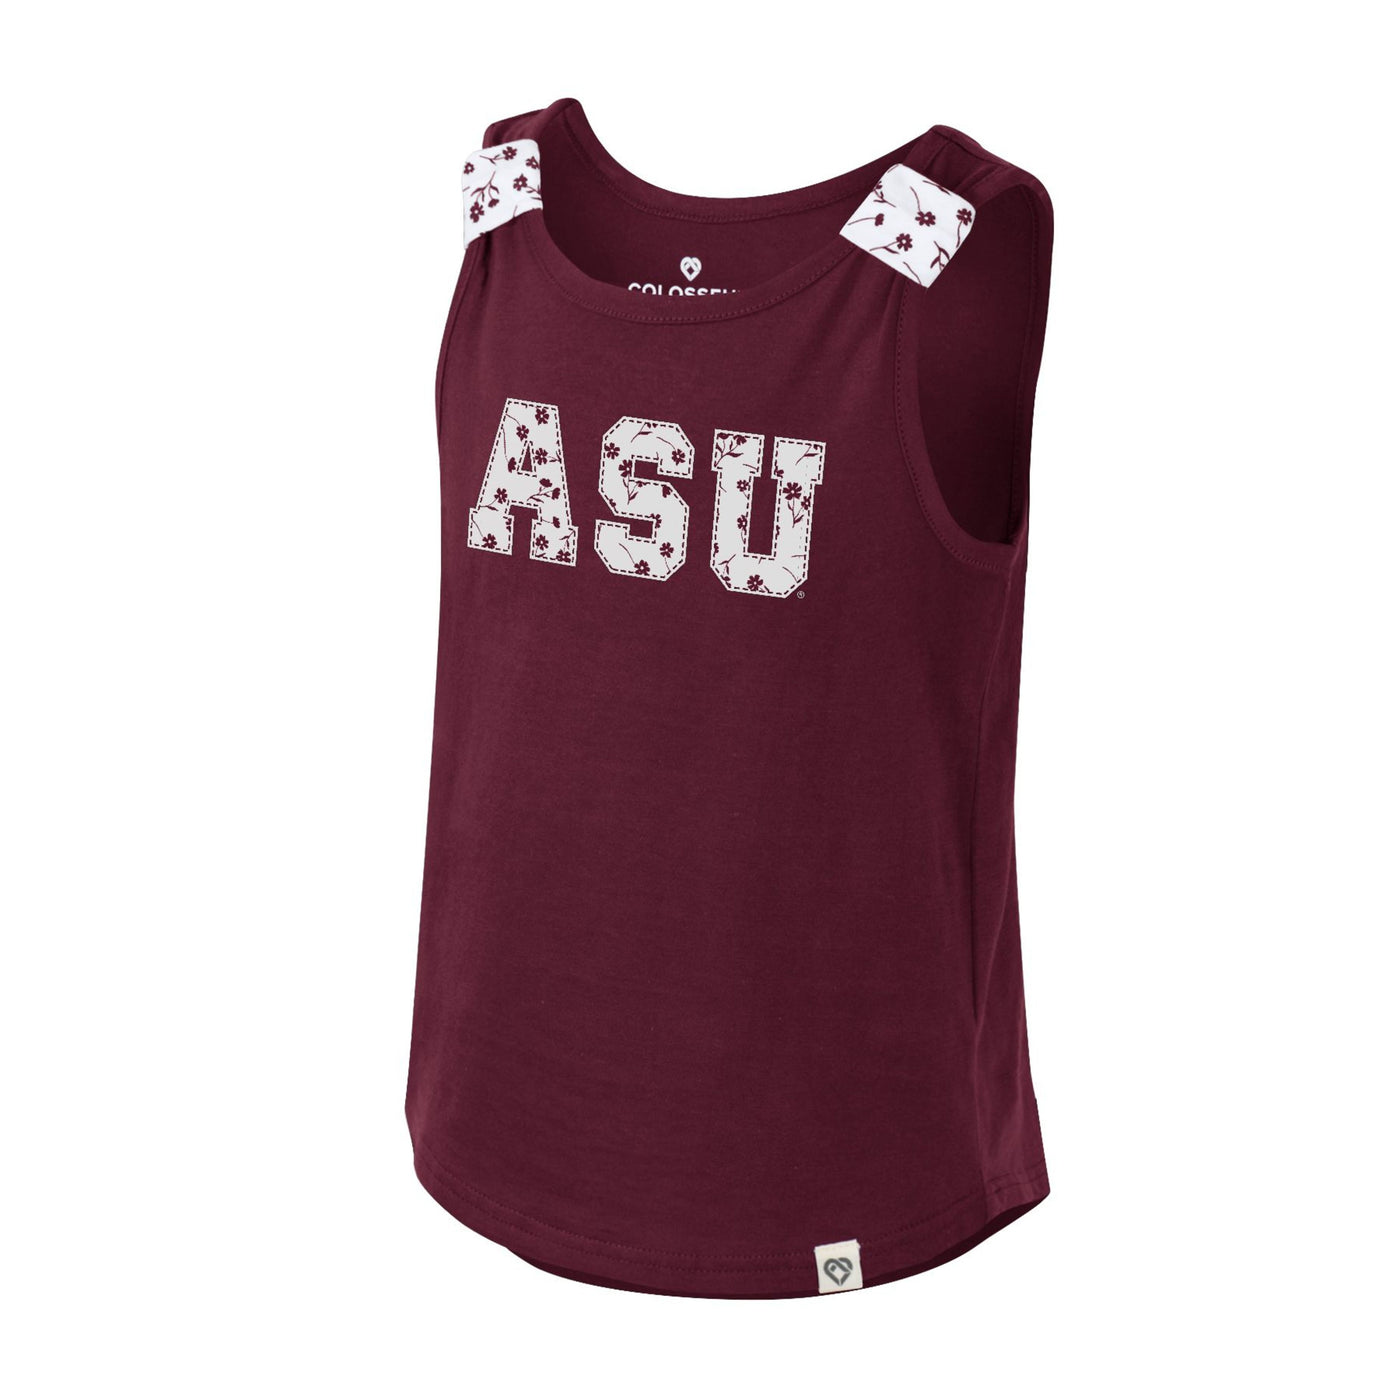 ASU maroon youth girls tank top with the ASU logo written in white with a maroon flower patter. The same white with flower pattern is used on a small section of the neckline.